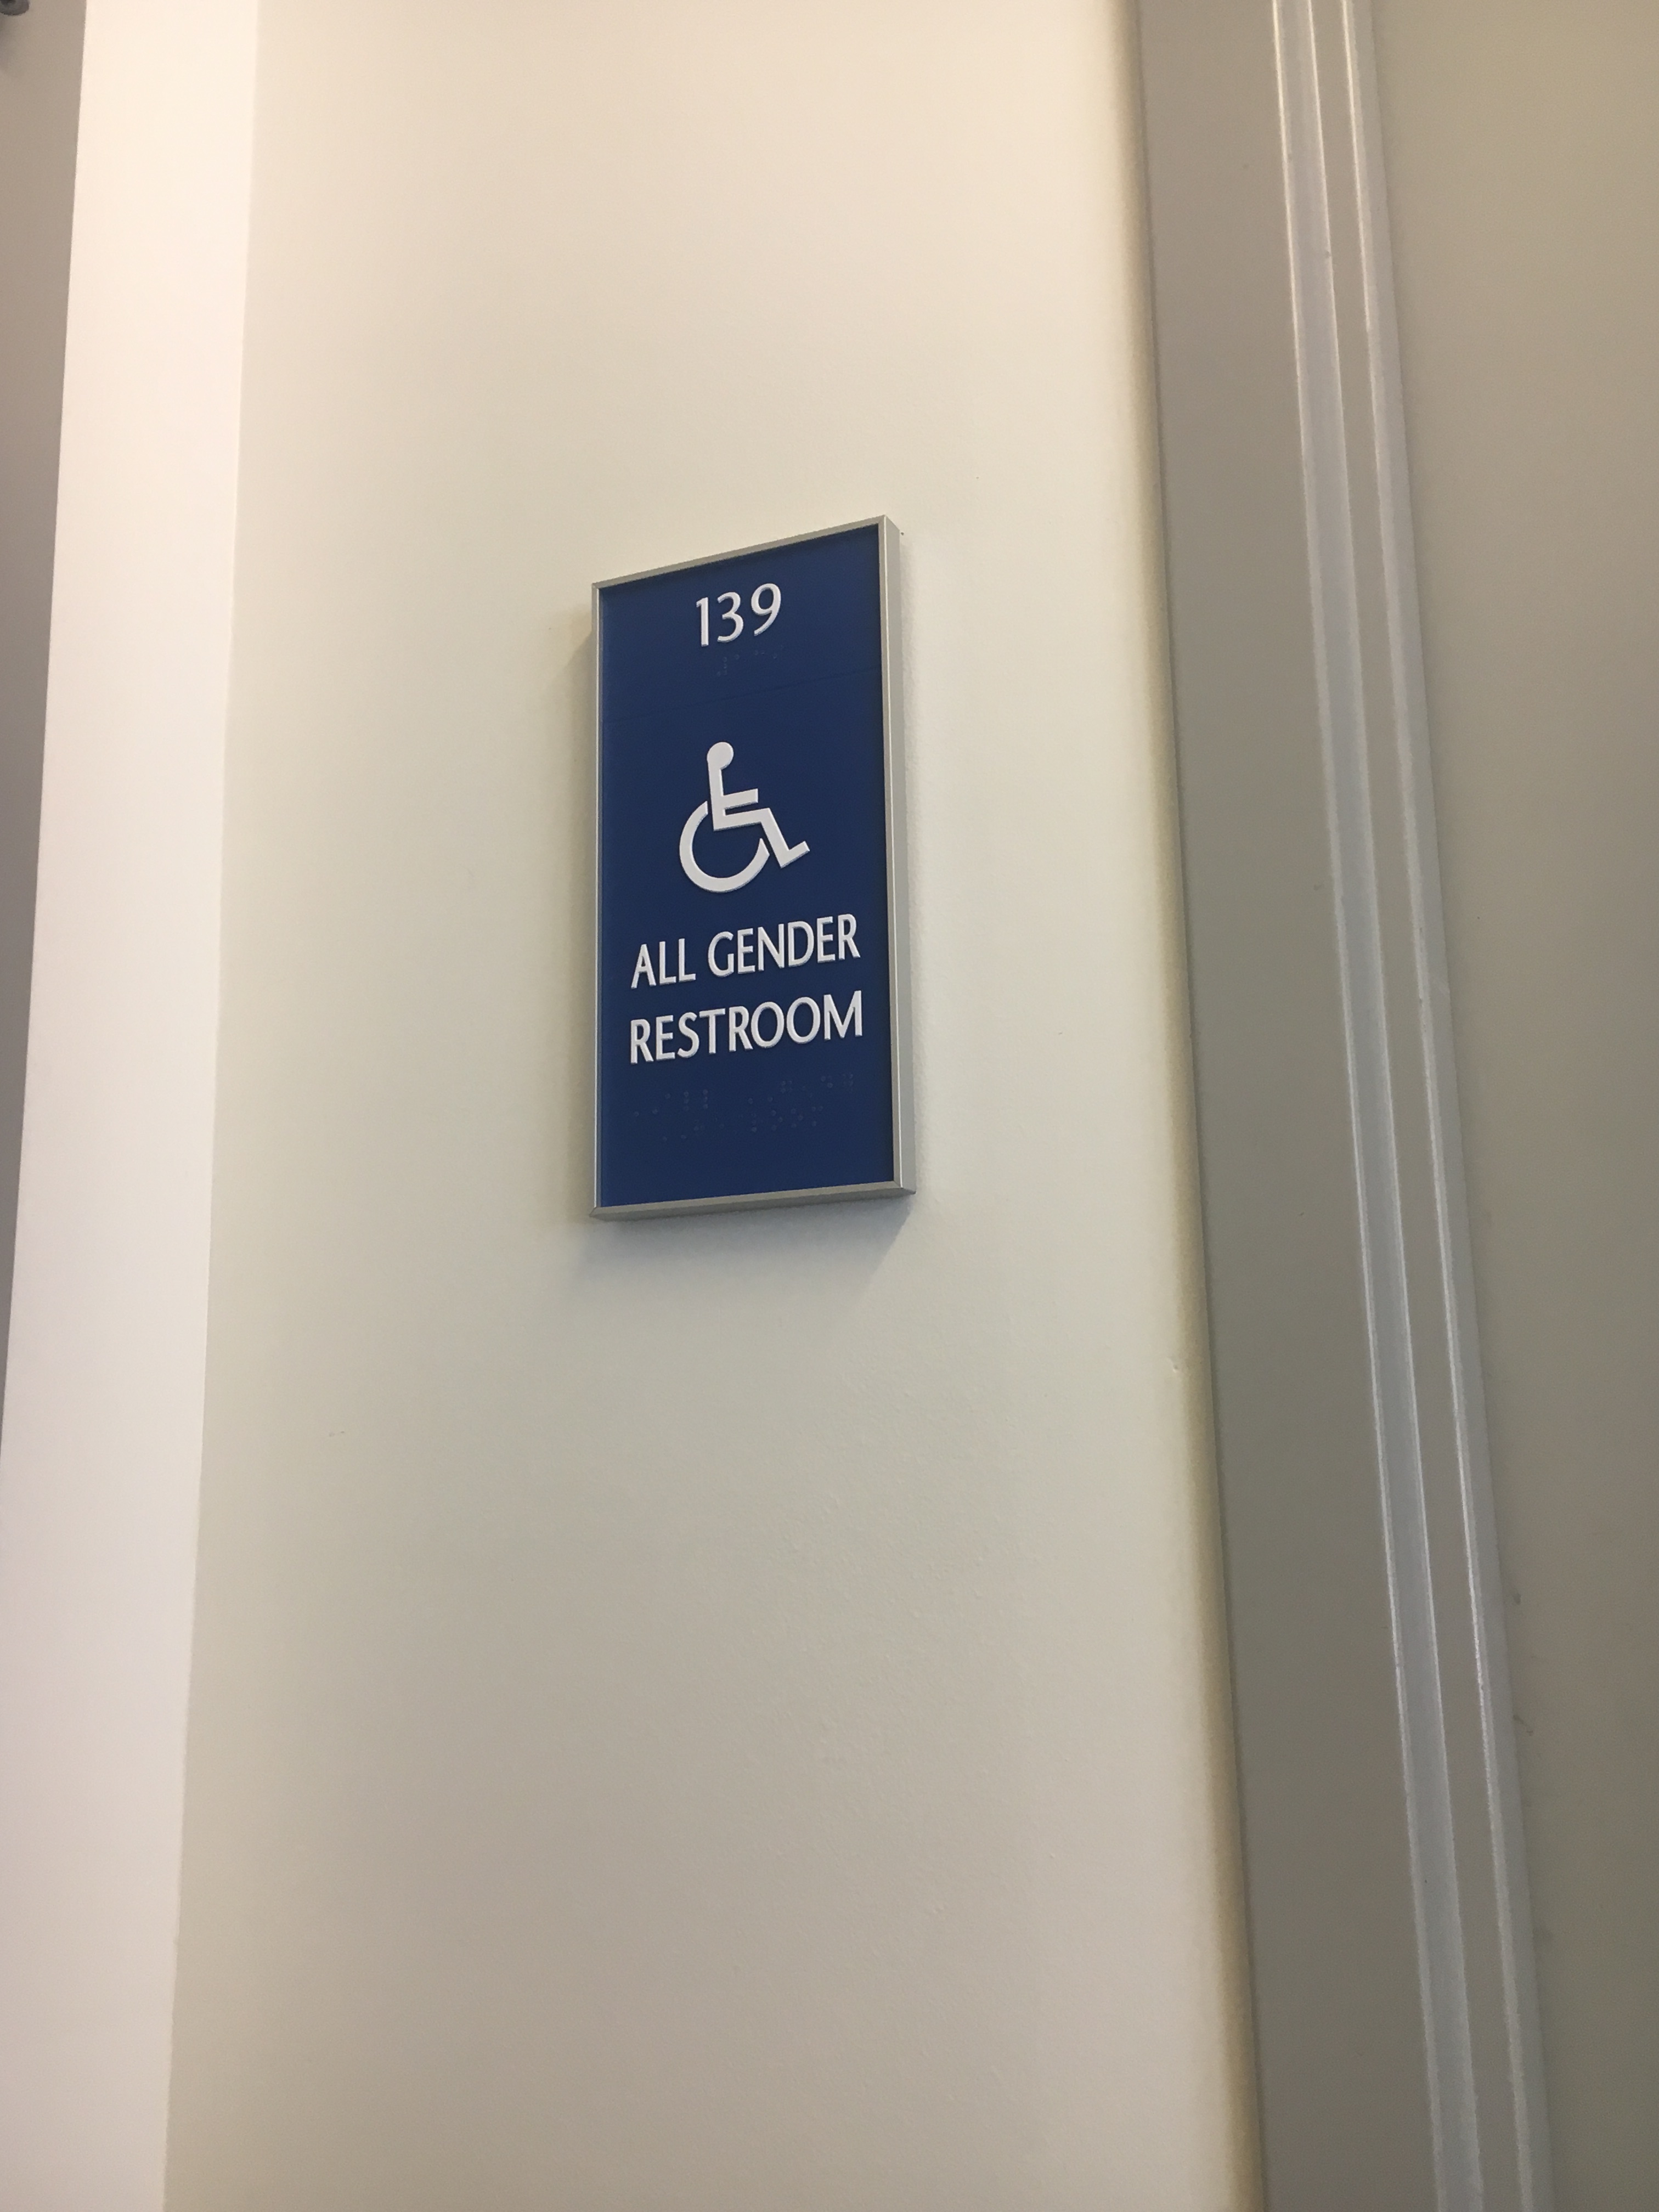 Sign outside companion/ all-gender bathroom indicating accessibility